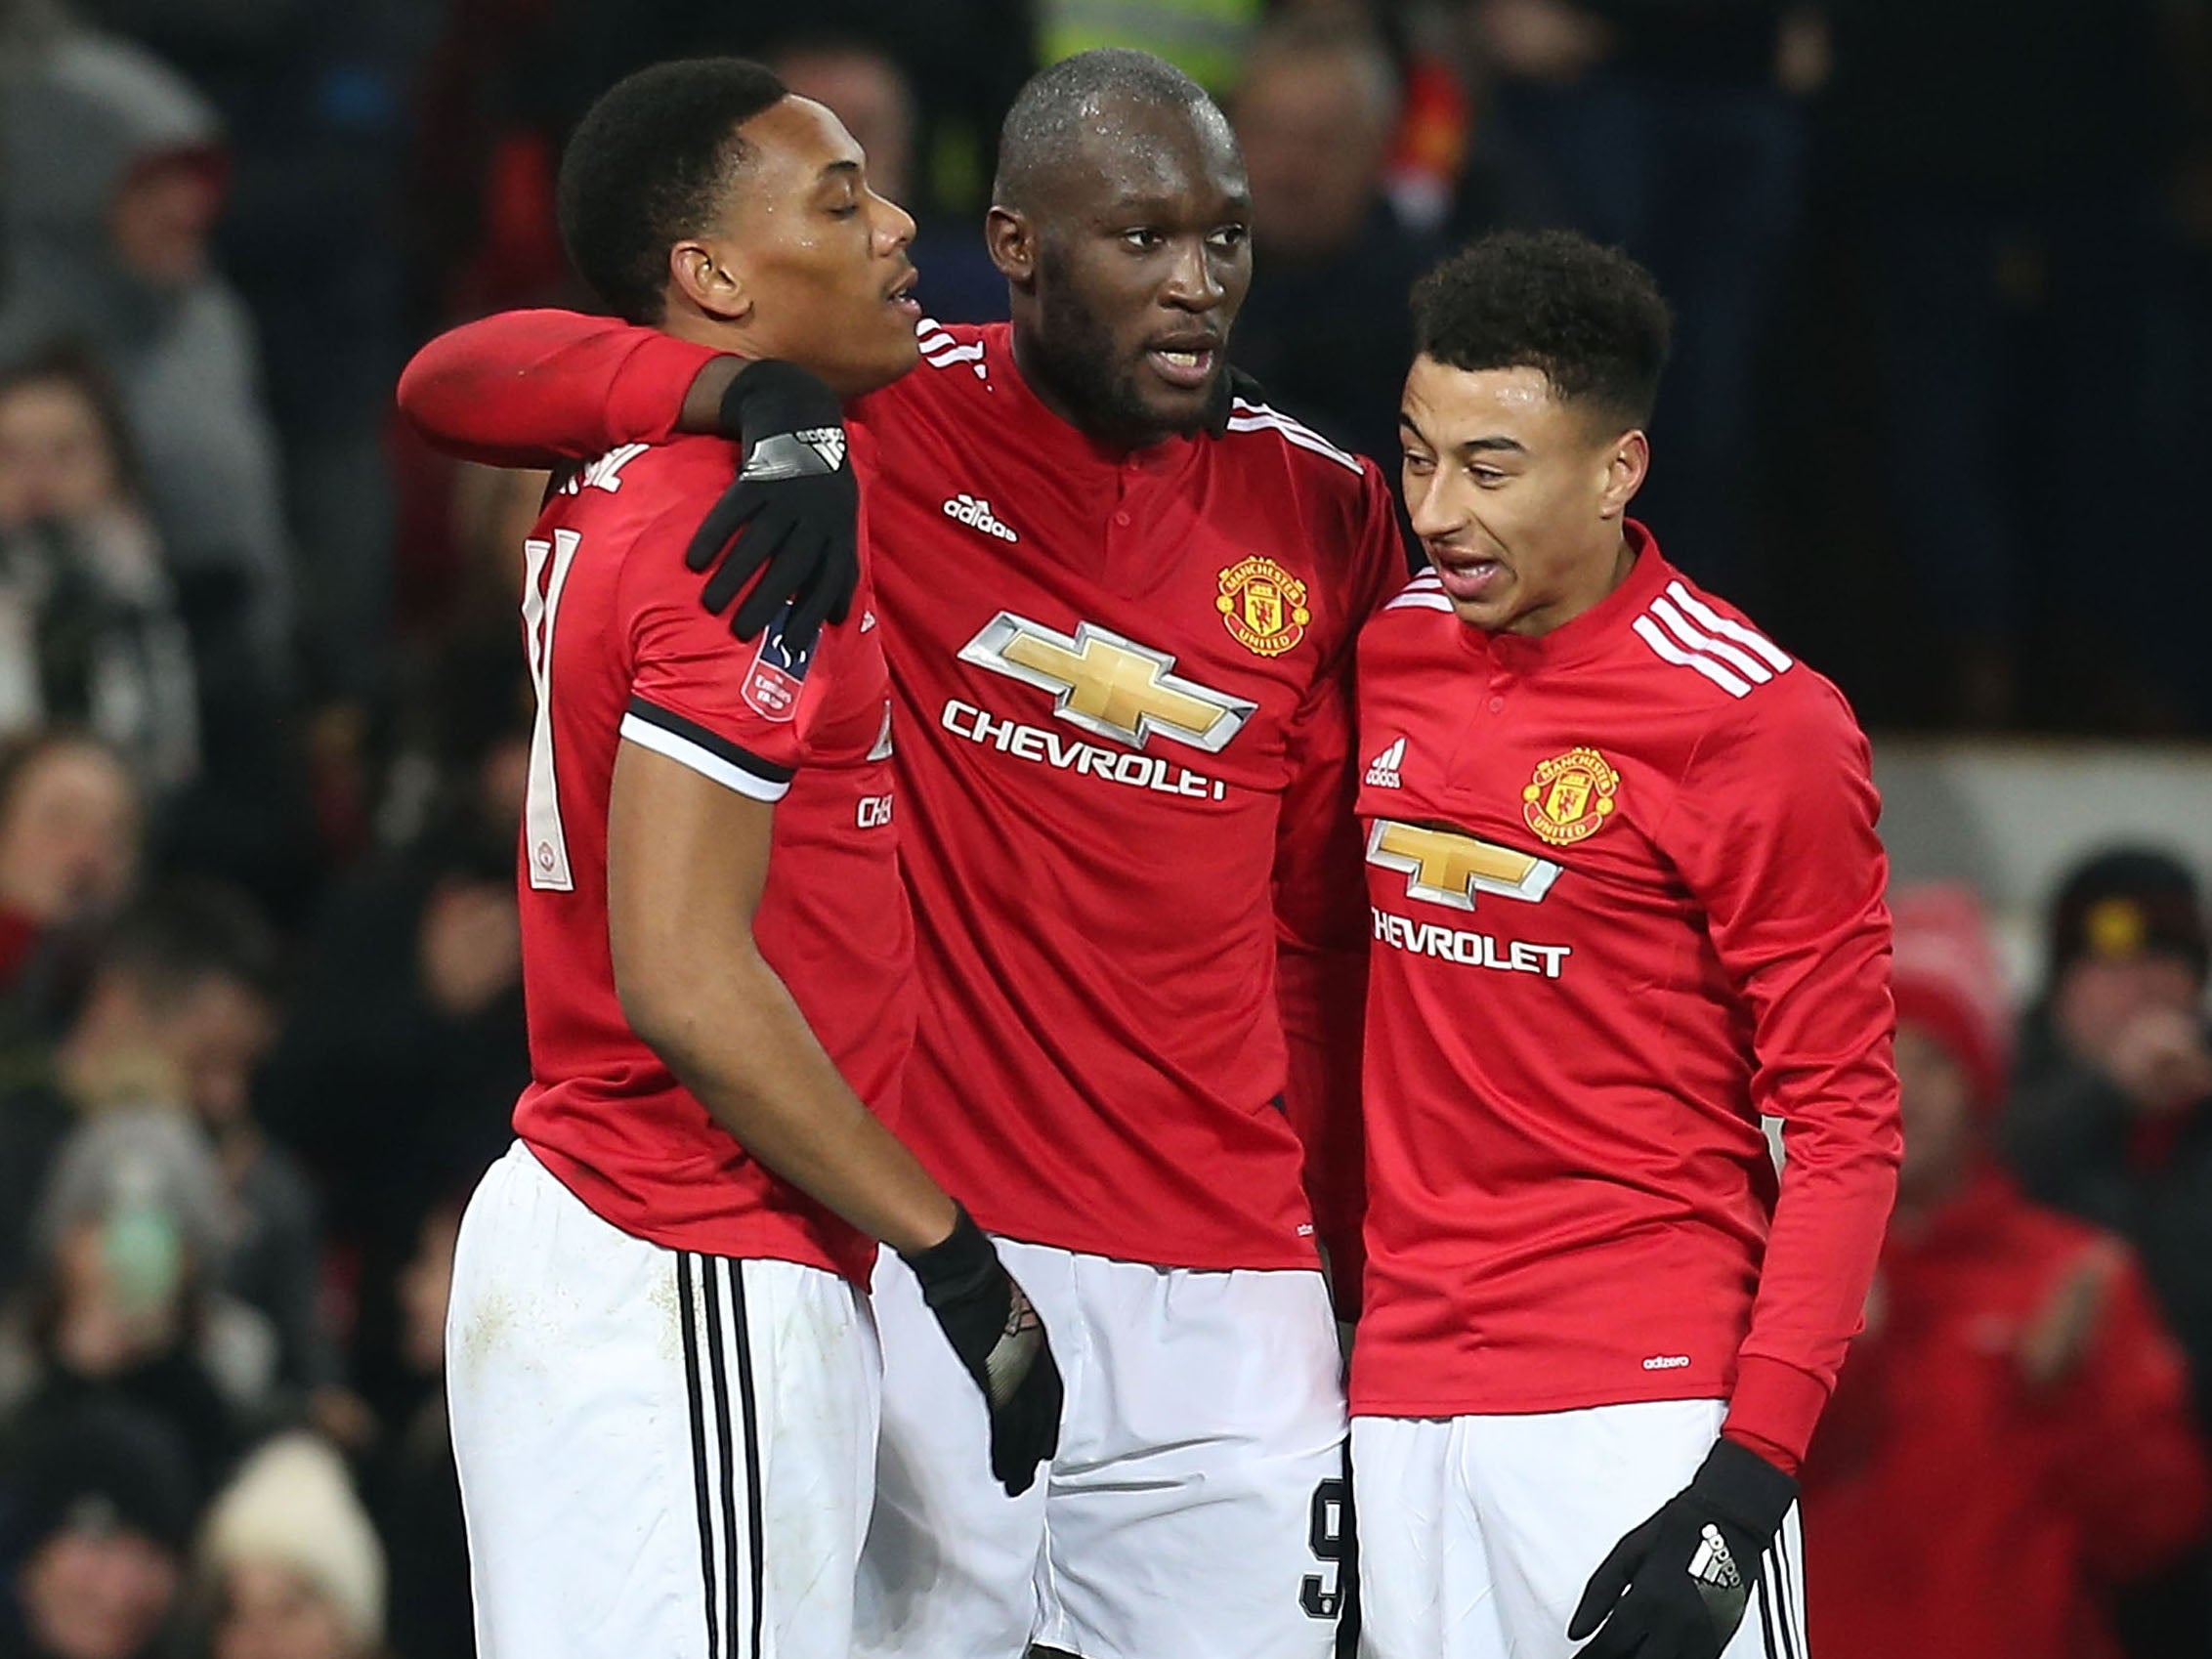 Manchester United are safely through into the draw for the fourth round